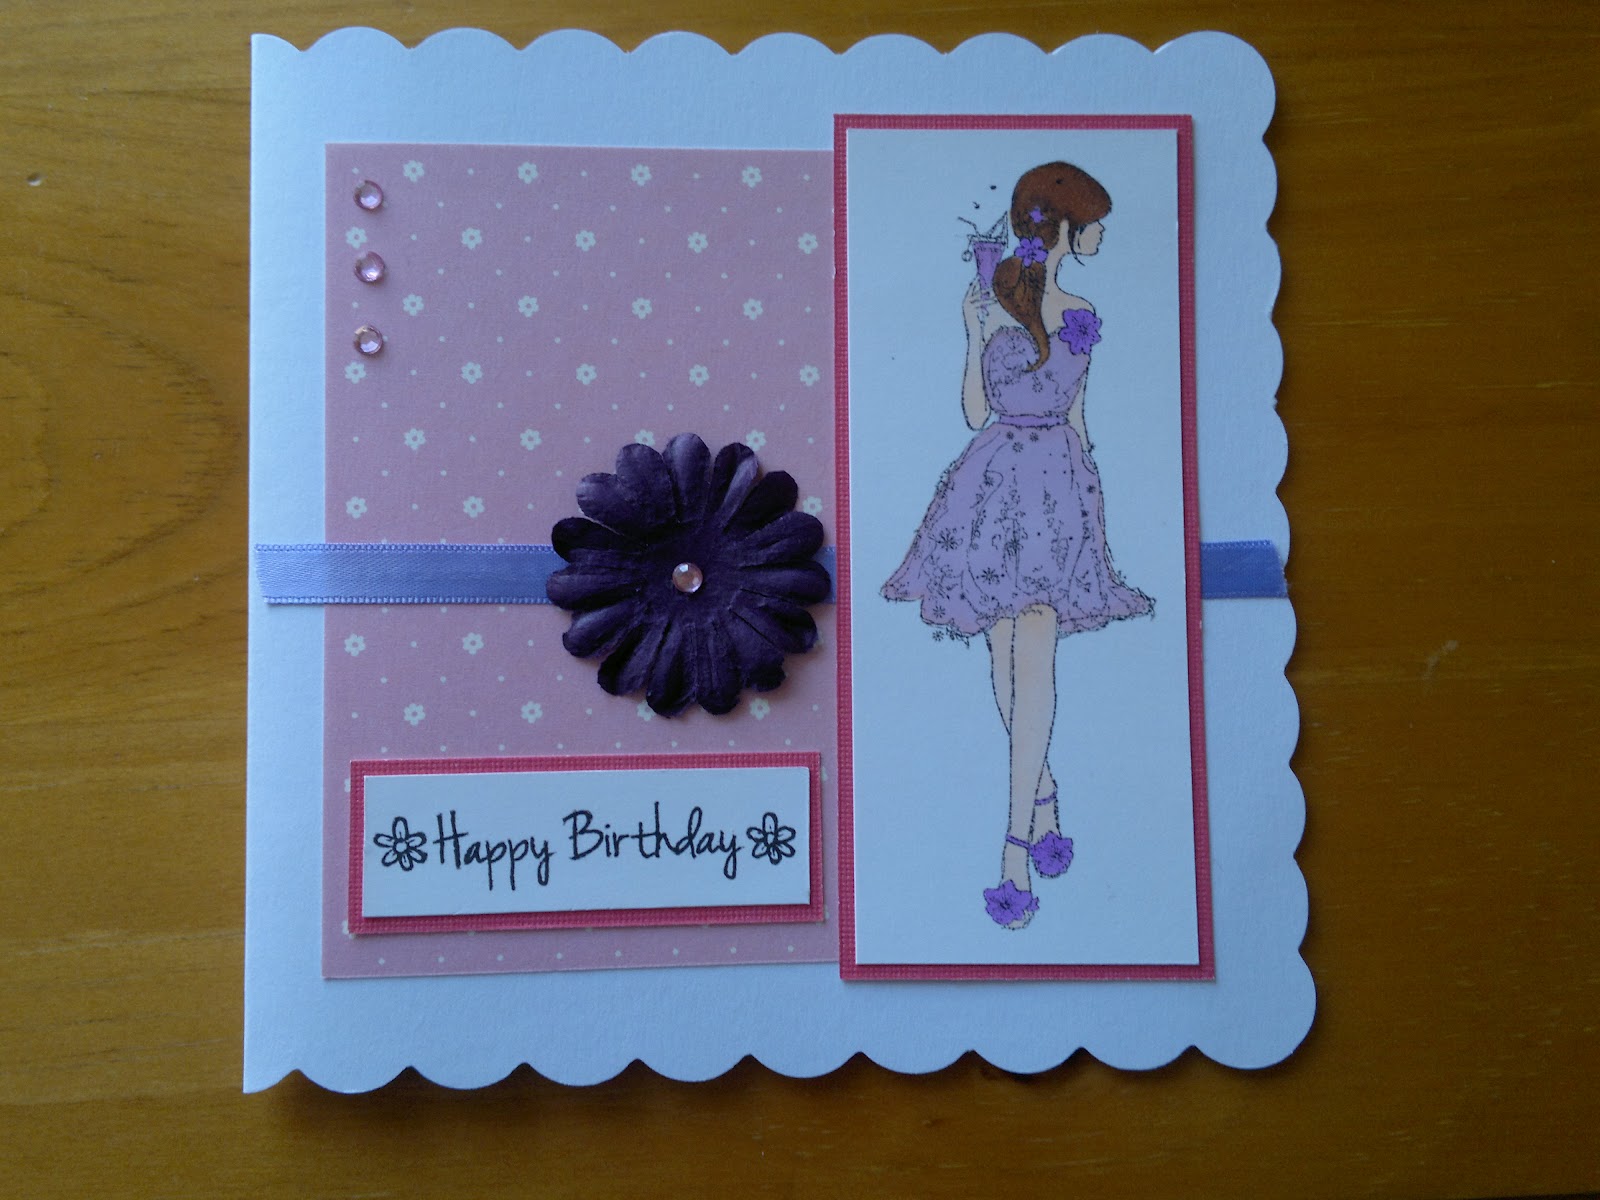 Katie's Craft Room: Strictly Party Birthday Card + Present